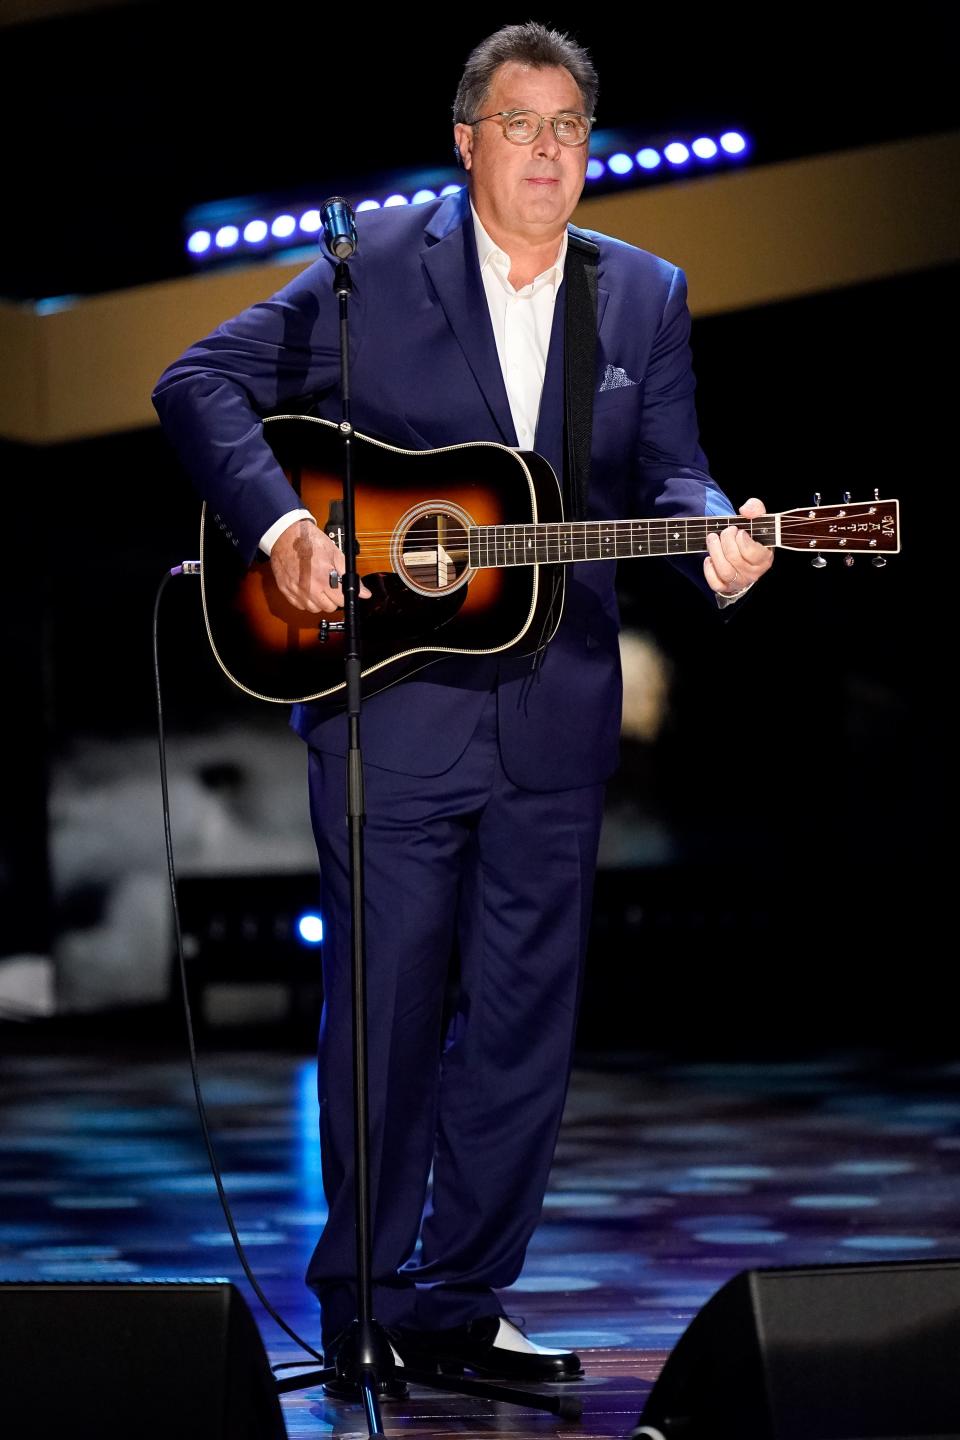 Vince Gill performs during the taping of the CMT Giants: Vince Gill special at The Fisher Center for the Performing Arts in Nashville, Tenn., Monday, Sept. 12, 2022.